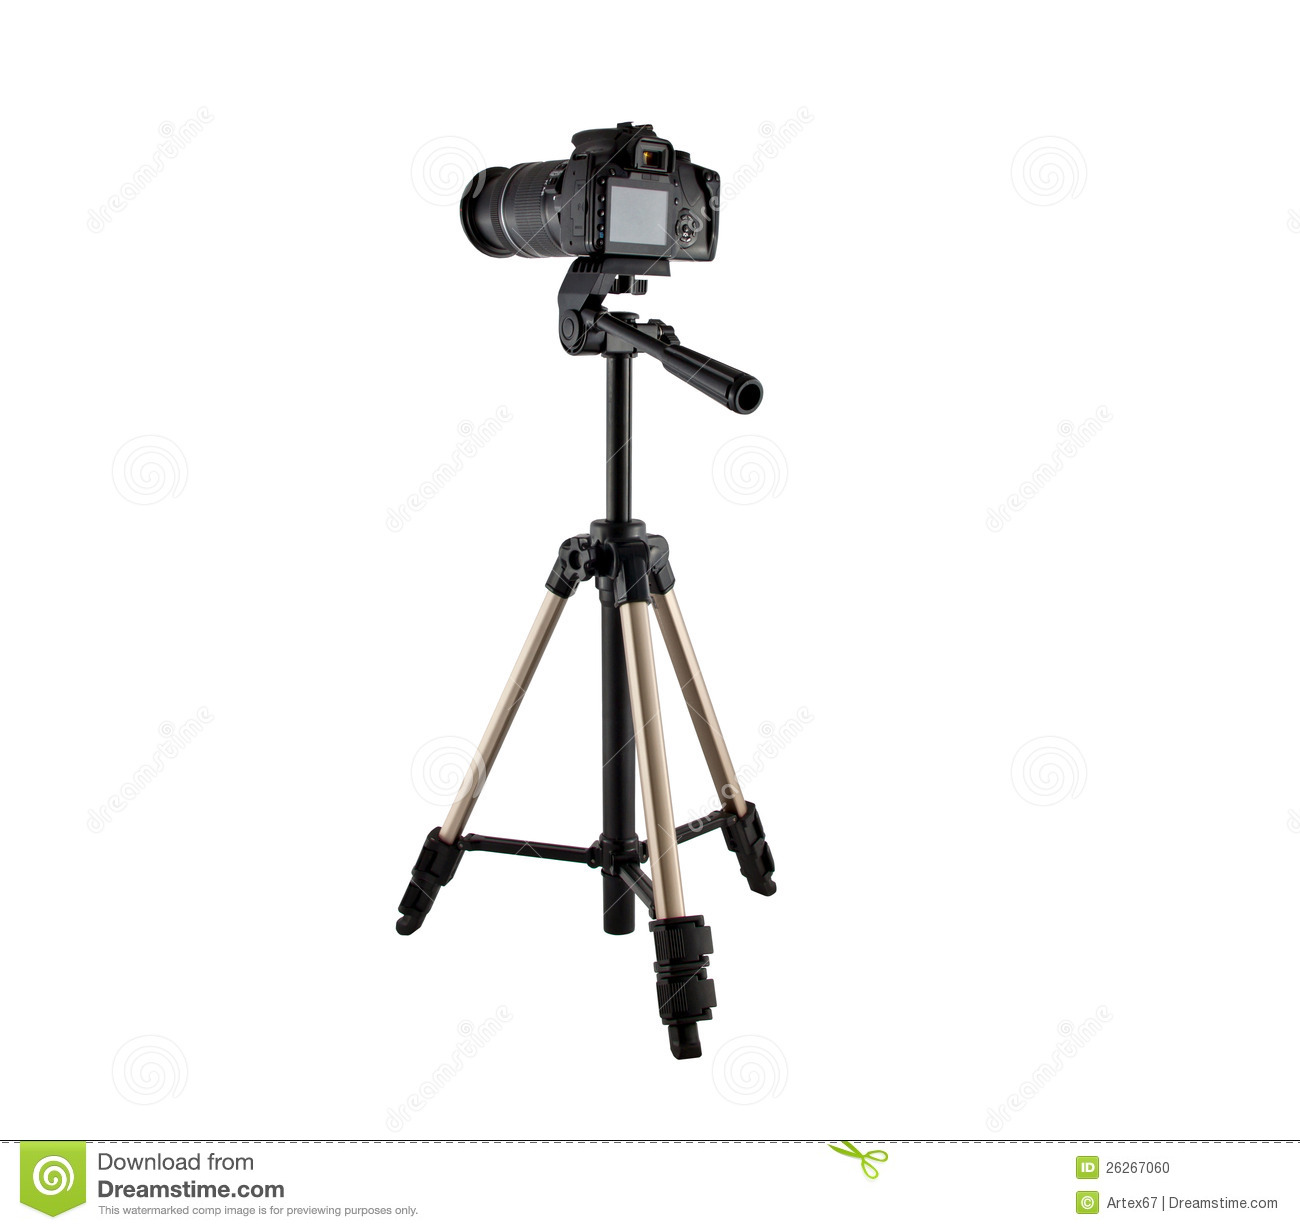 Related Pictures Illustration Camera On Tripod Clip Art